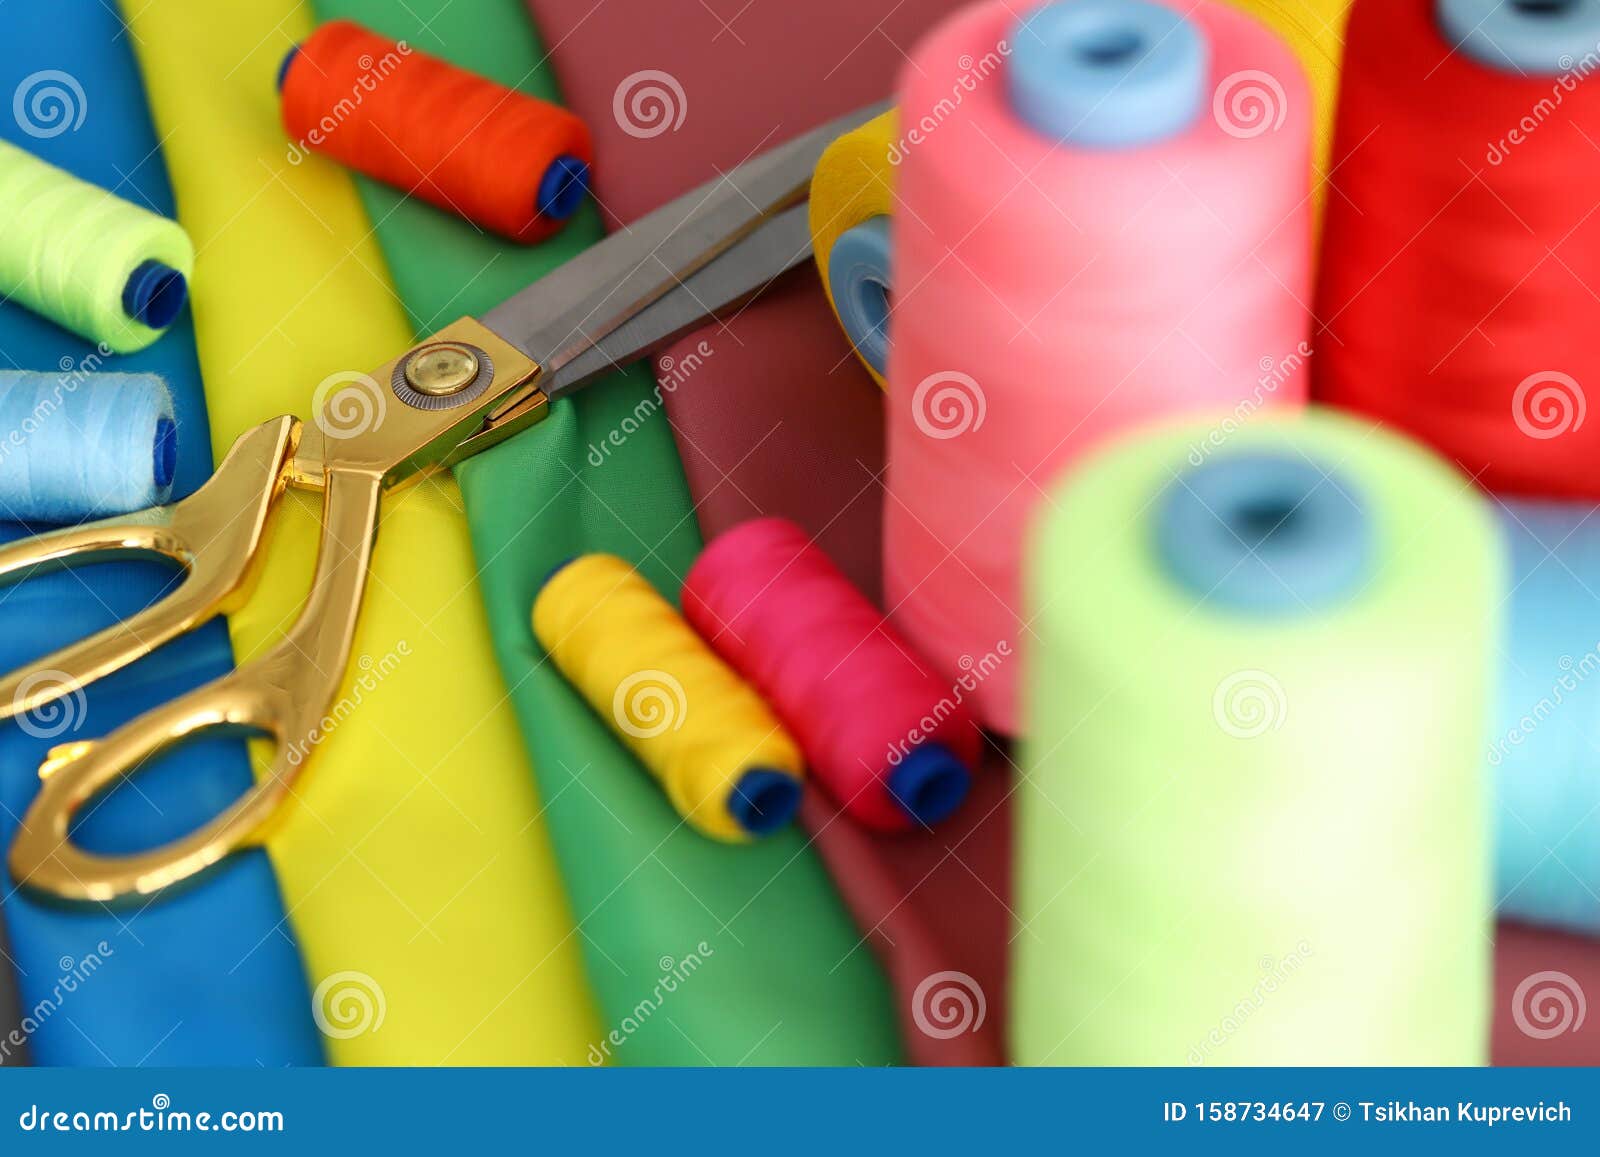 Tailors equipment for work stock image. Image of professional - 158734647